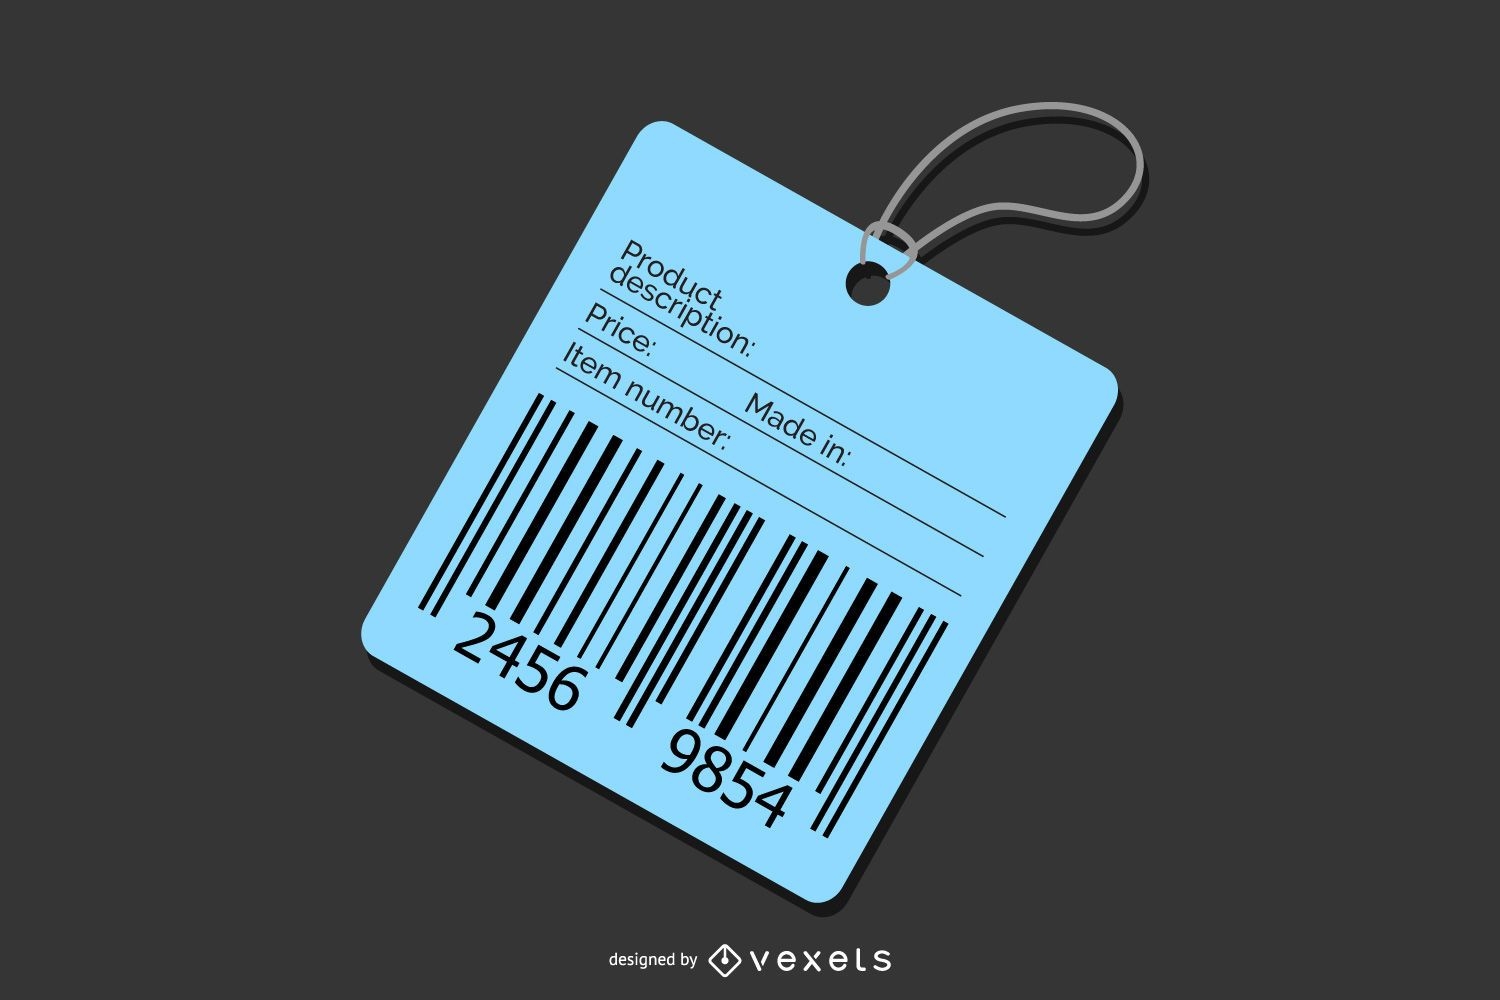 barcode with price tag